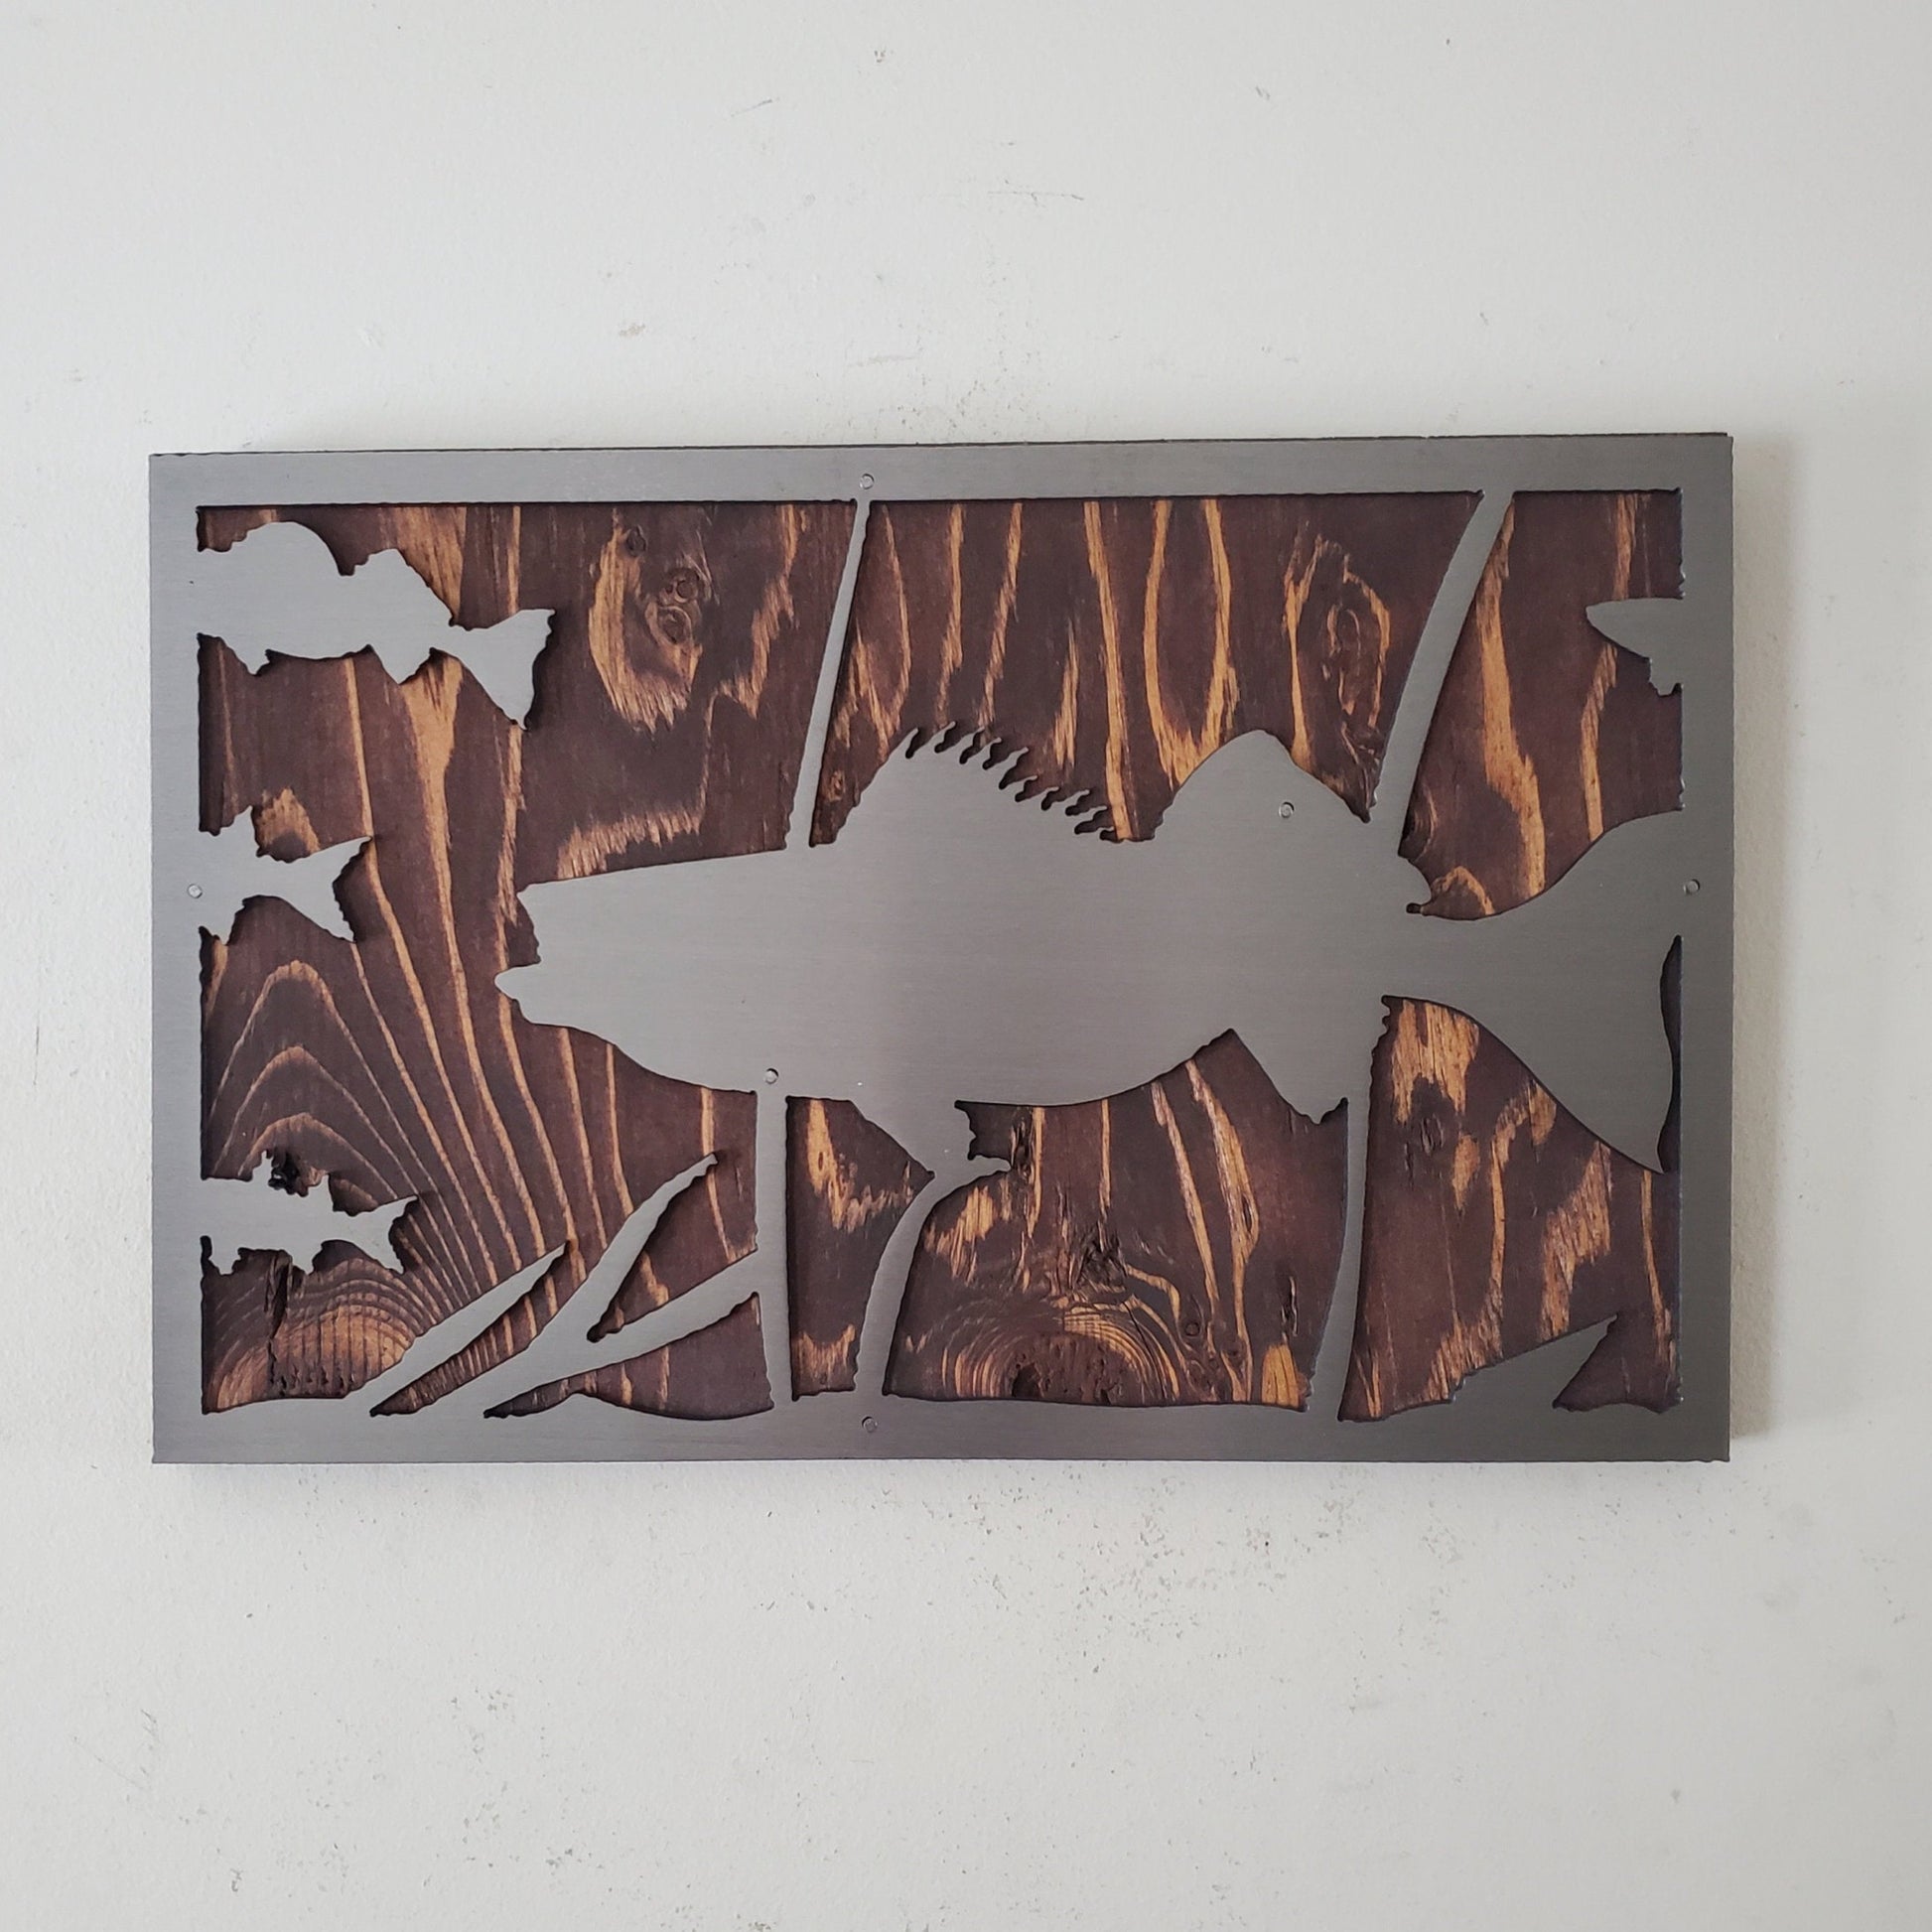 Metal art cut out of a walleye fish swimming in a natural habitat, mounted on a stained wooden background. The details of the fish and the surrounding nature are captured perfectly. The art work has an installed hanger on the back for easy hanging